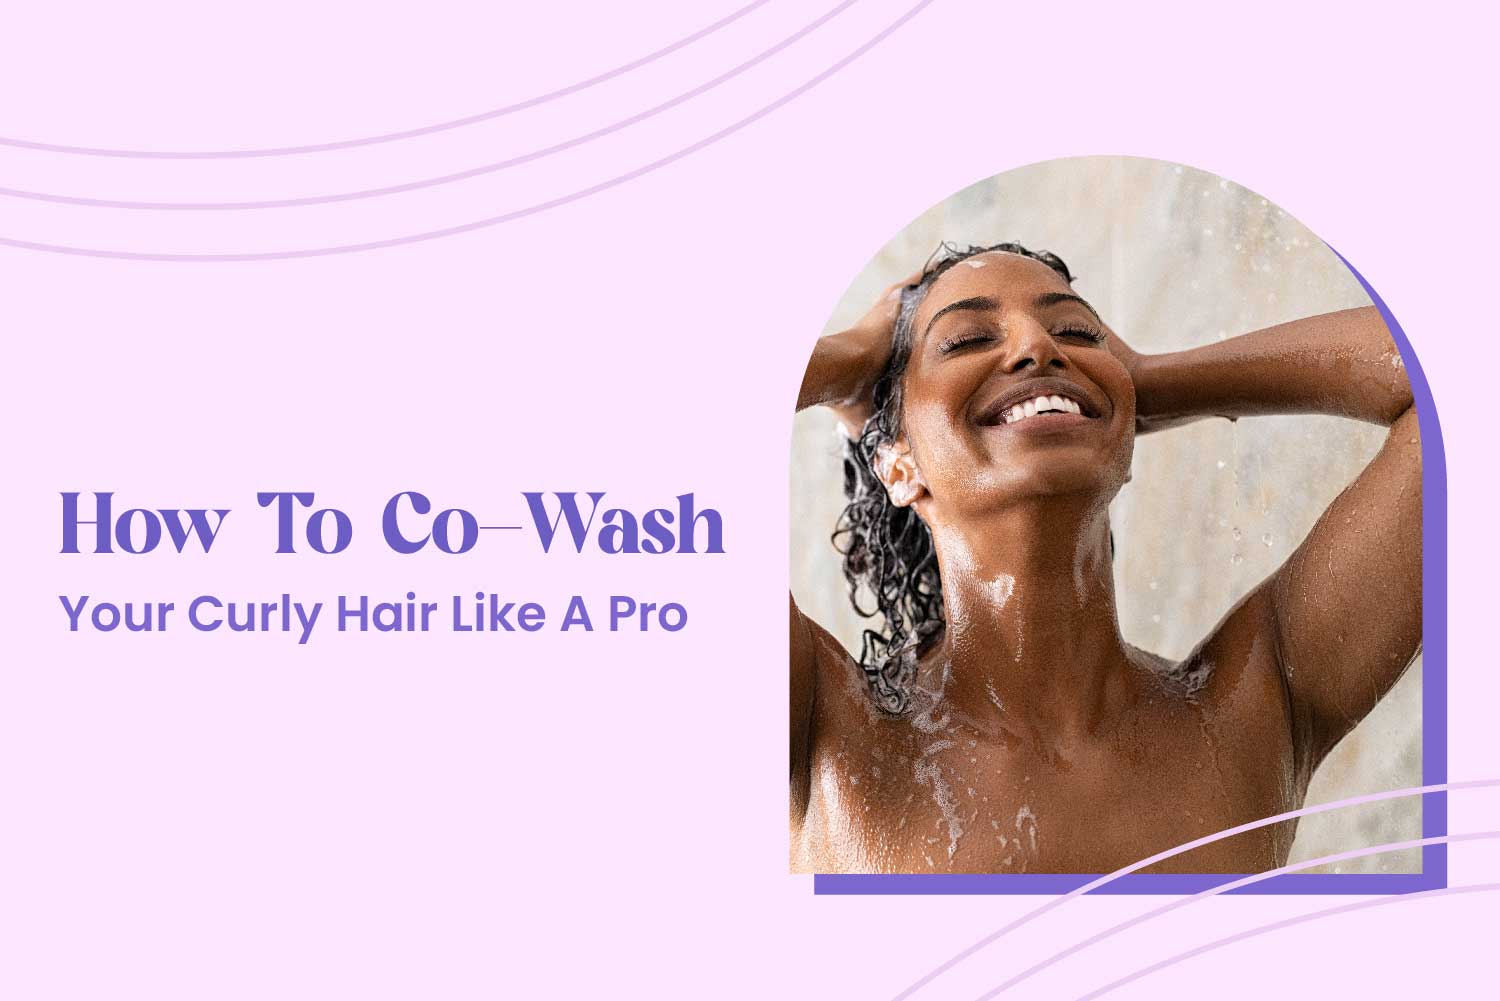 How To Co-Wash Your Curly Hair Like a Pro